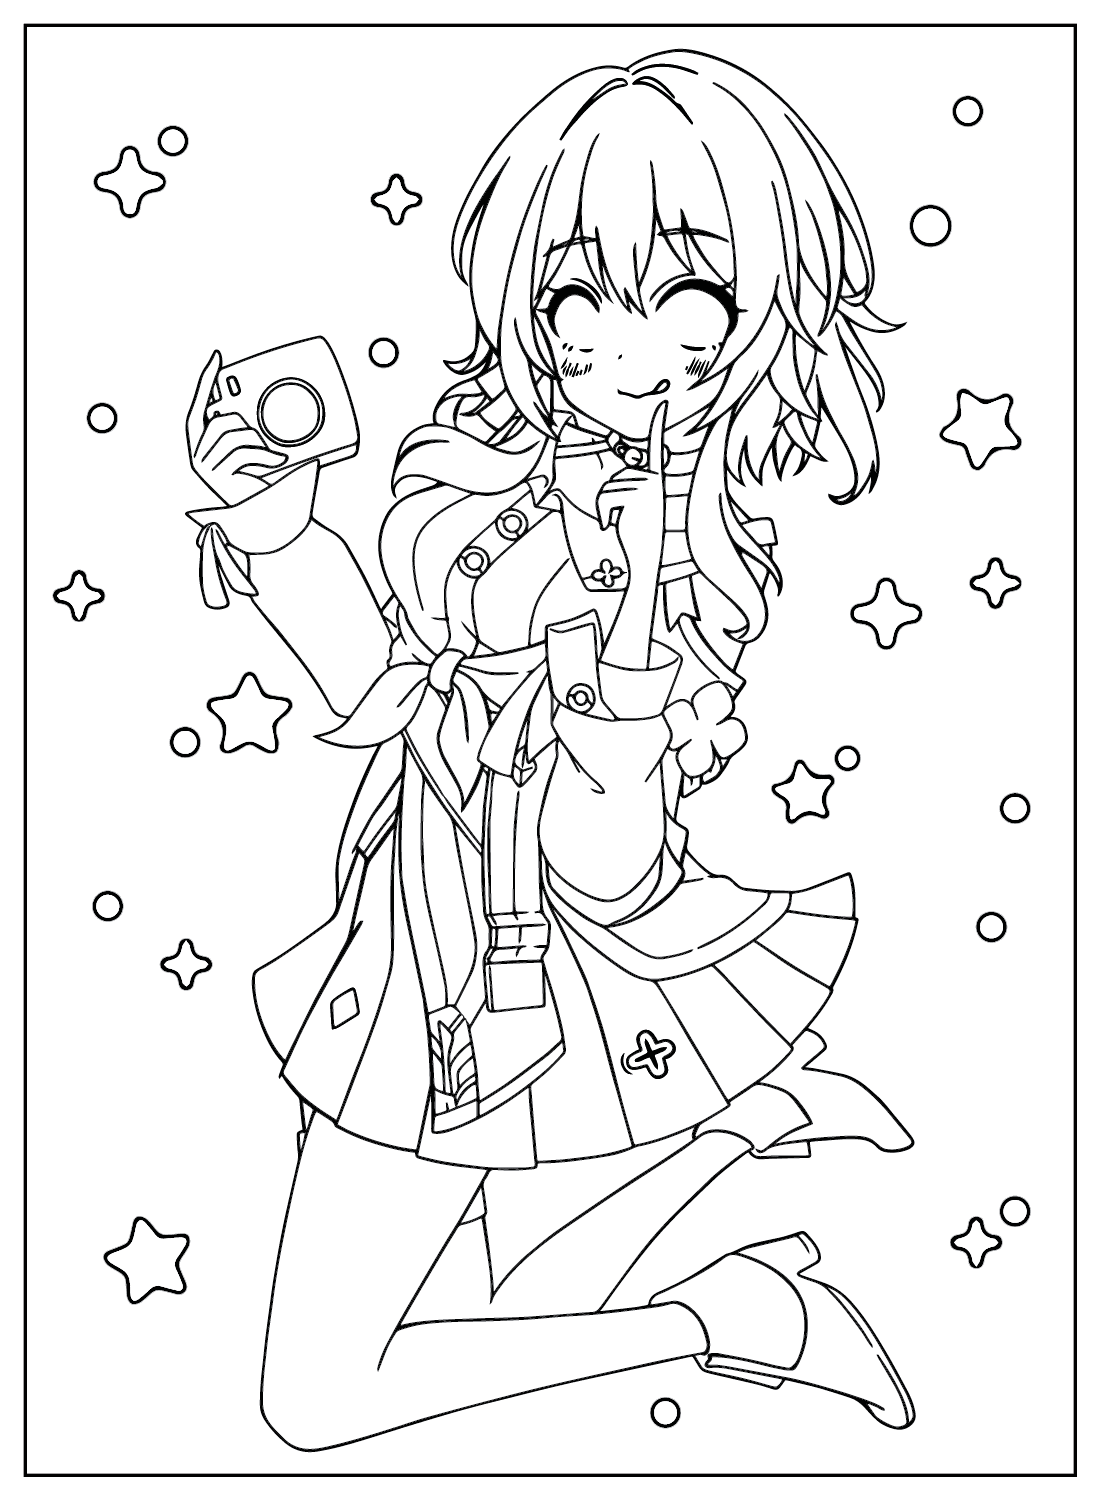 Coloring Page March 7th from Honkai: Star Rail